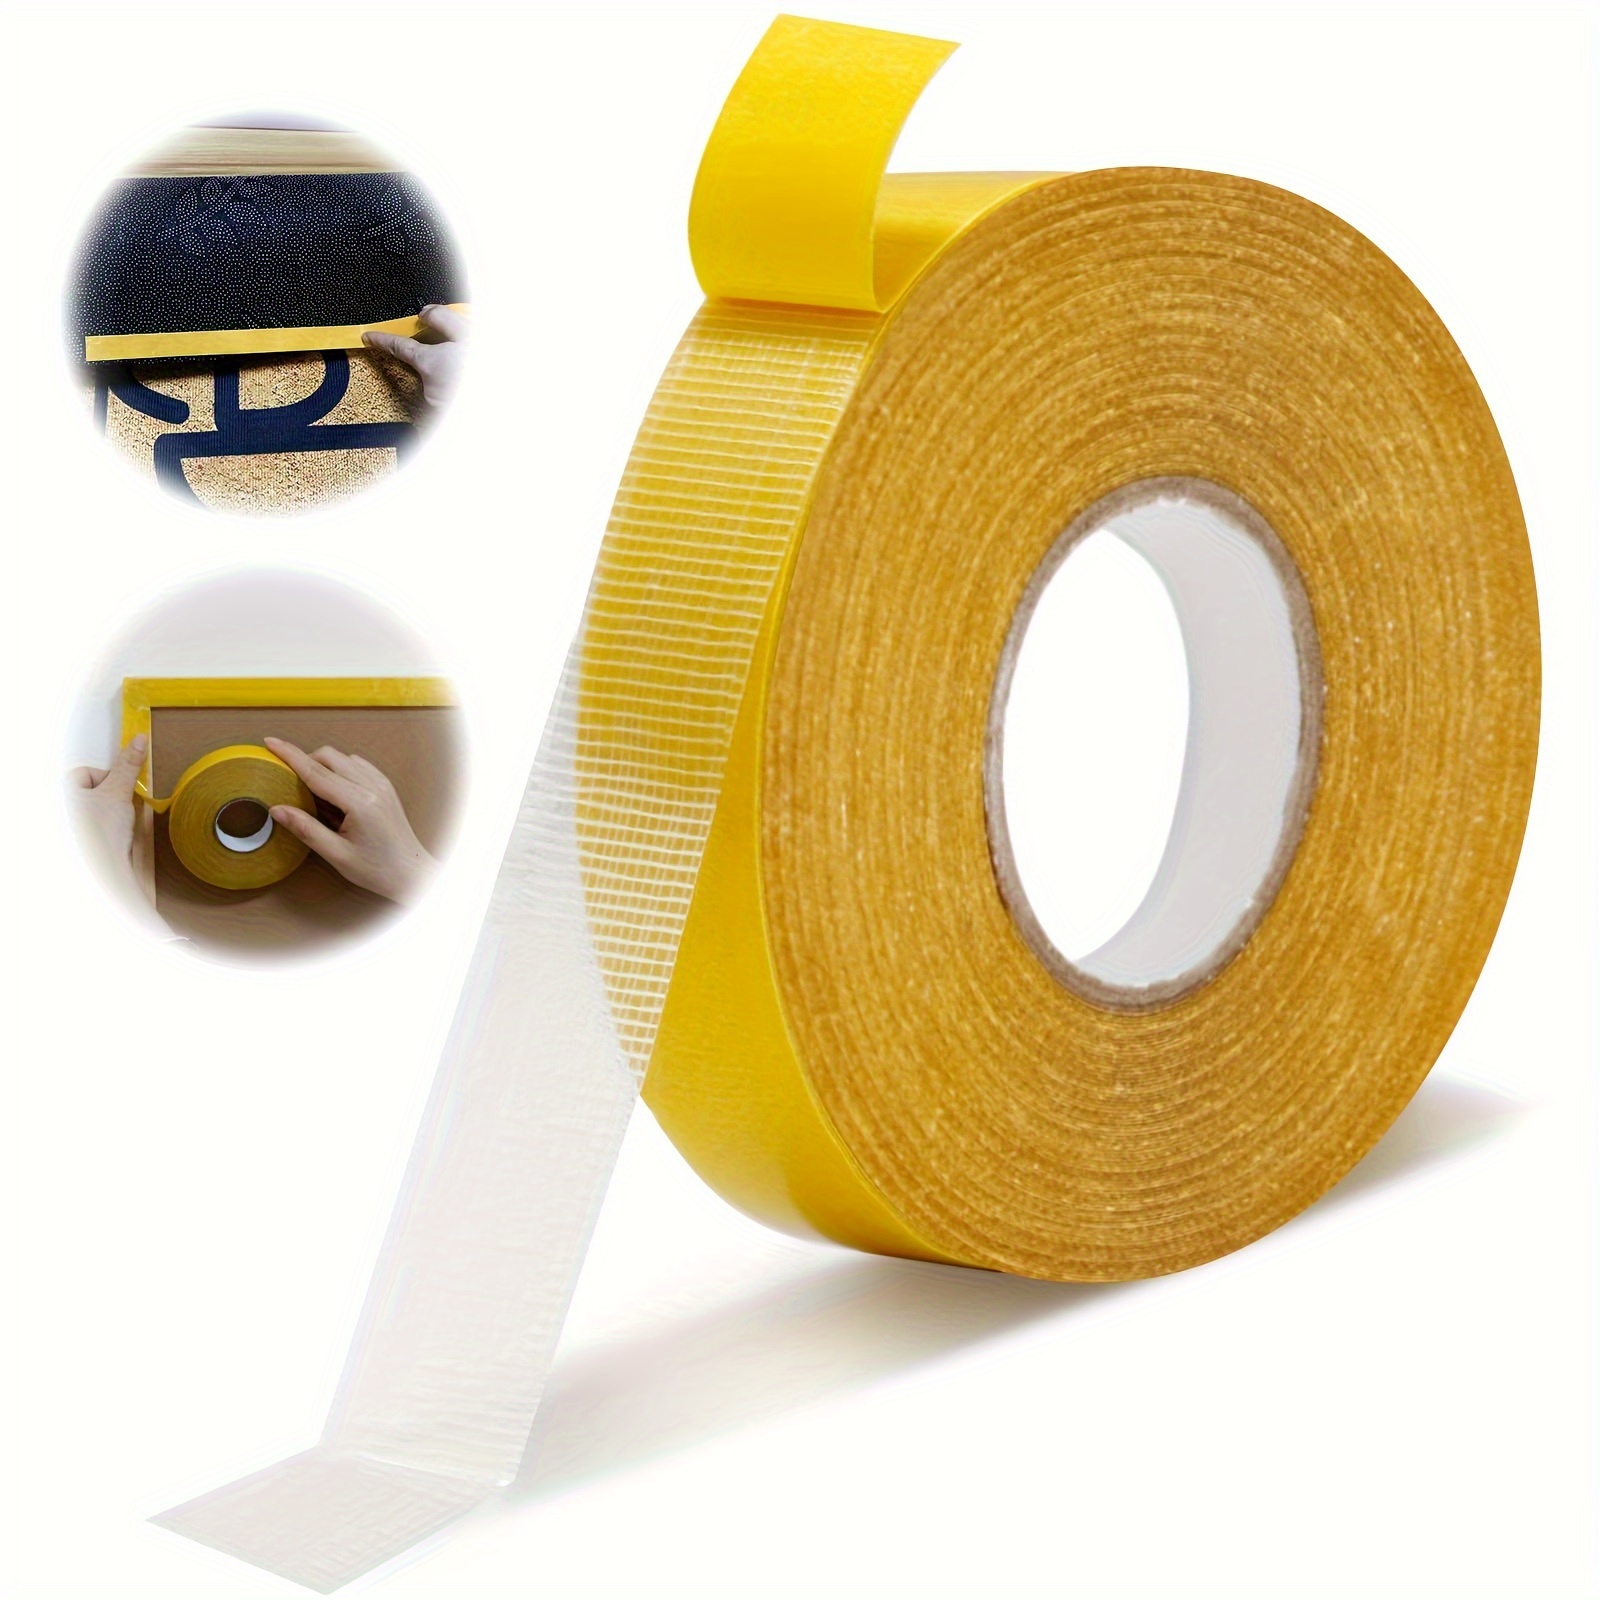 

Double-sided Heavy-duty, High-tack Fabric Installation Tape (0.79in*66 Ft), Clear Fiberglass Material, Super Adhesive, Removable, No Residue.great Helper Fixing Carpets, Decorations, Posters, Frames